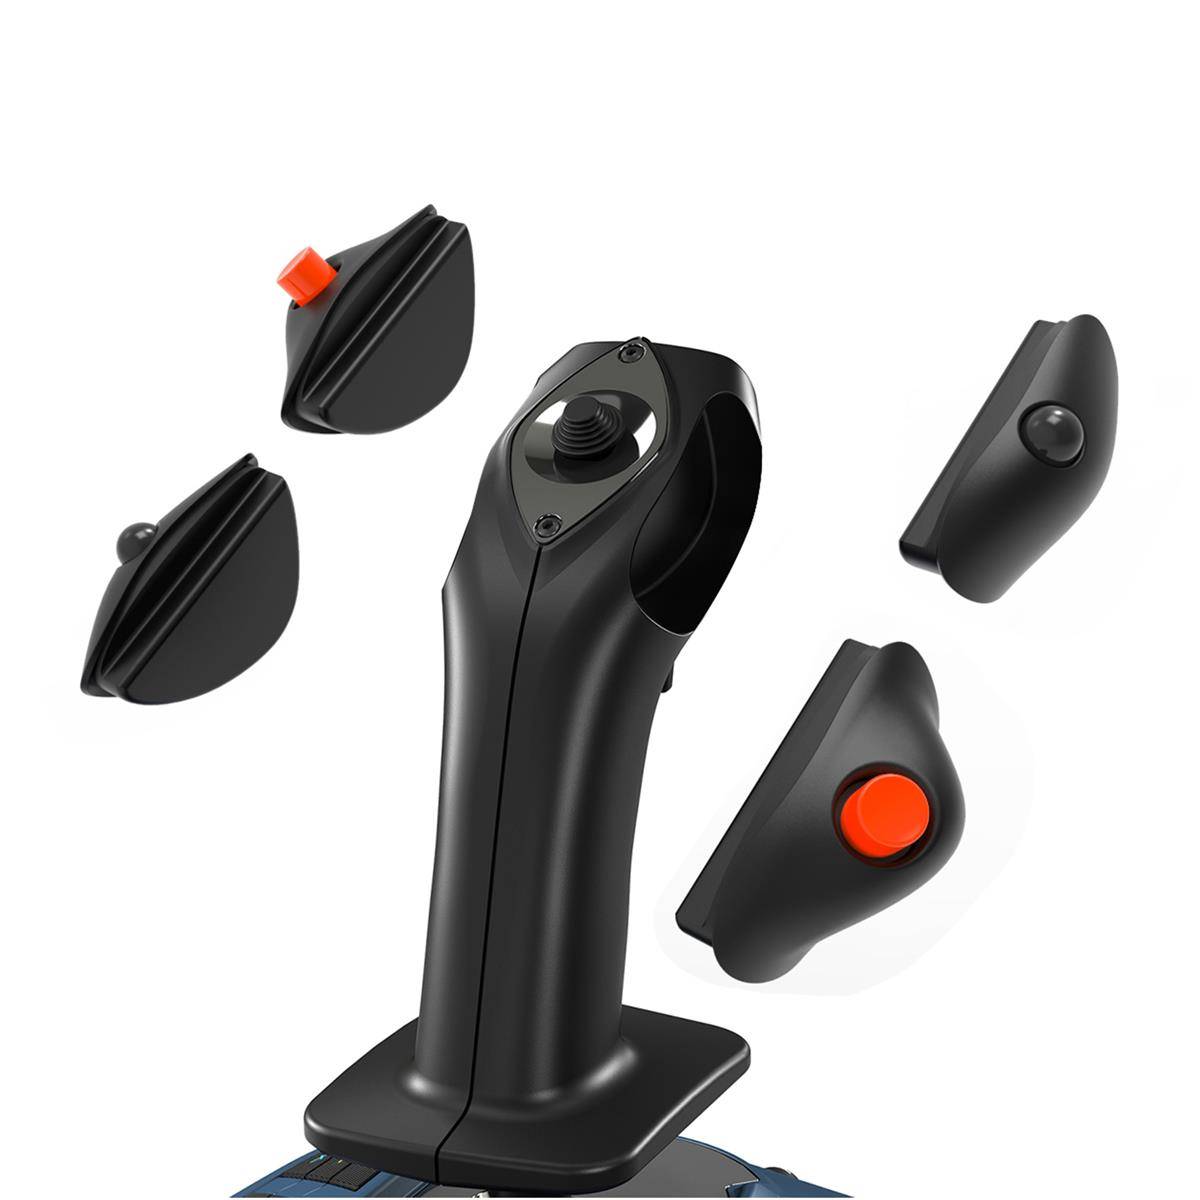 TCA Xbox Sidestick One Xbox Airbus PC Series X|S, Joystick Thrustmaster Invastor - and for Edition